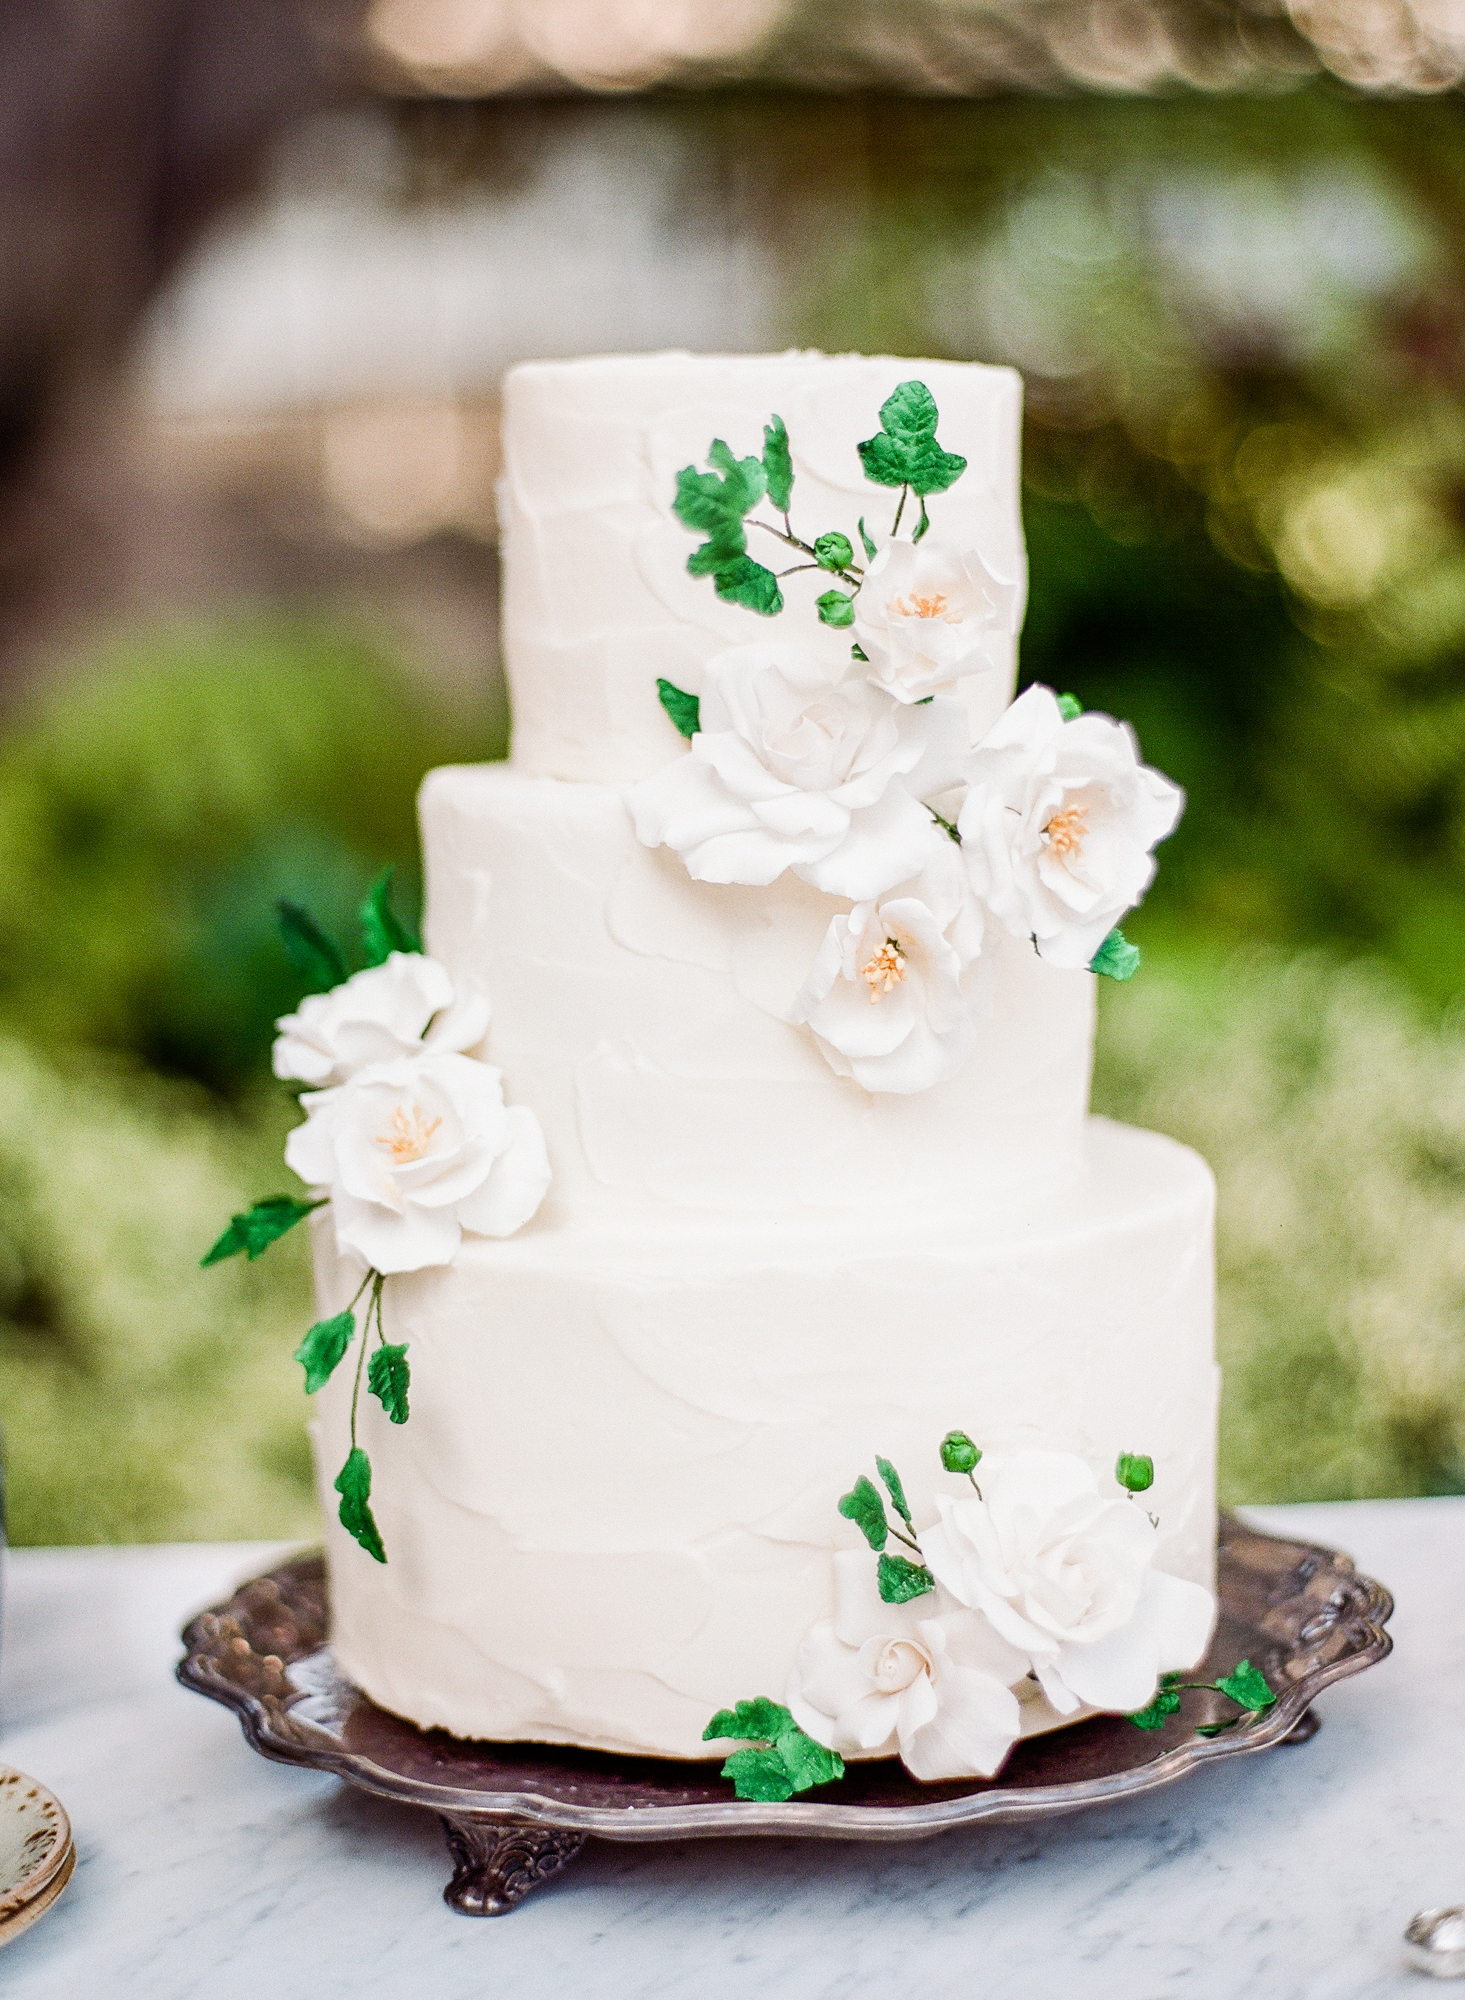 25 Vanilla Wedding Cakes That Are Anything But Boring ...